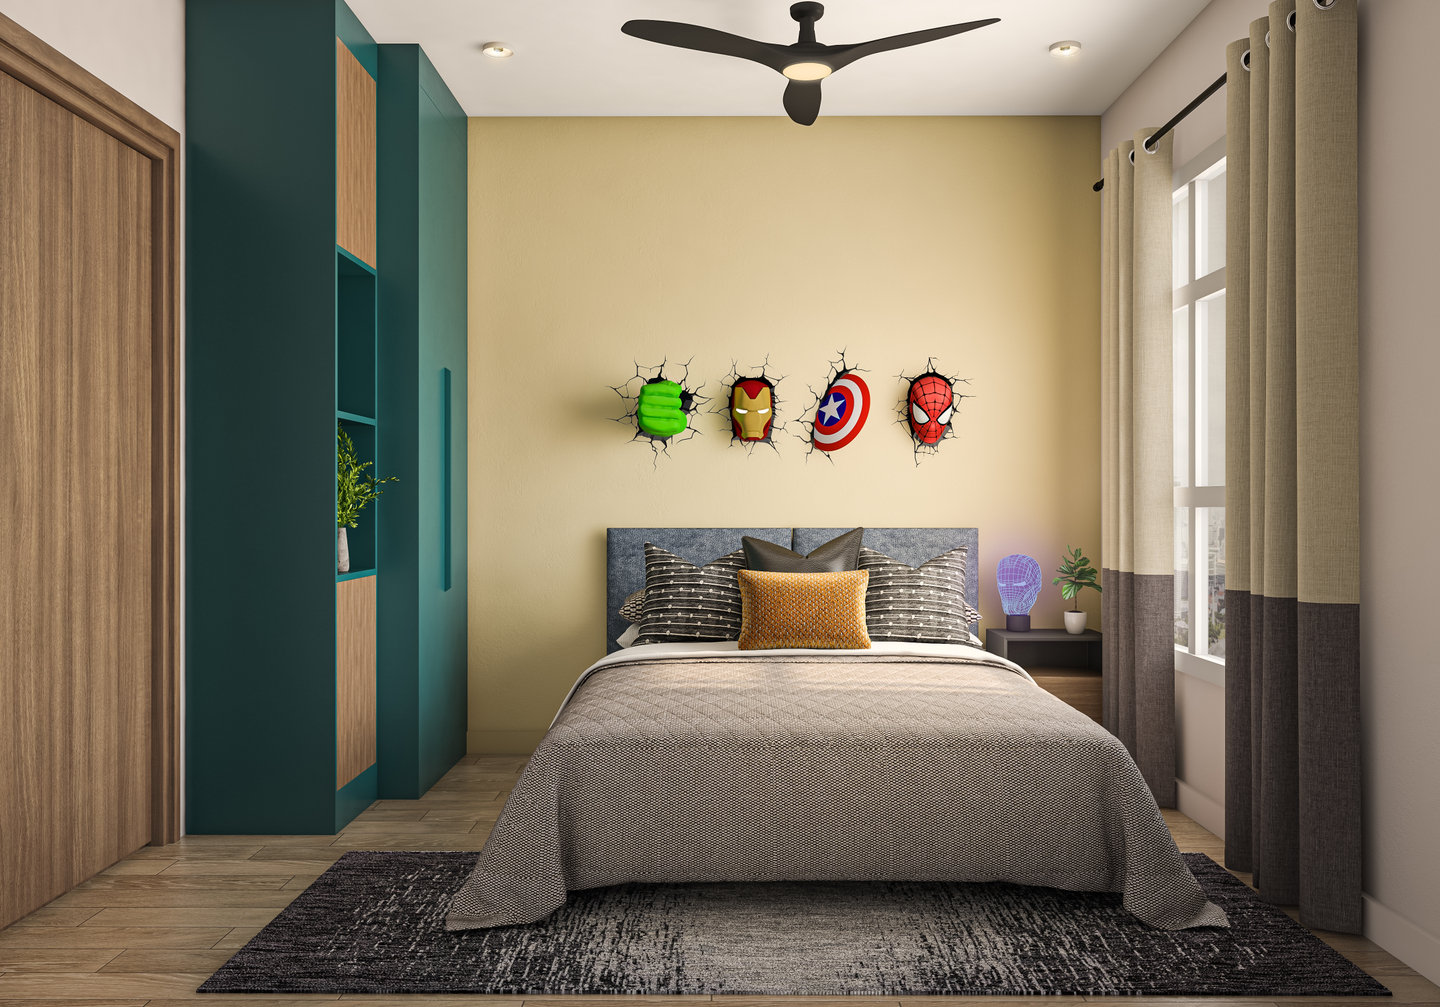 Simple Kids Bedroom Design with Fun Characters on Wall | Livspace